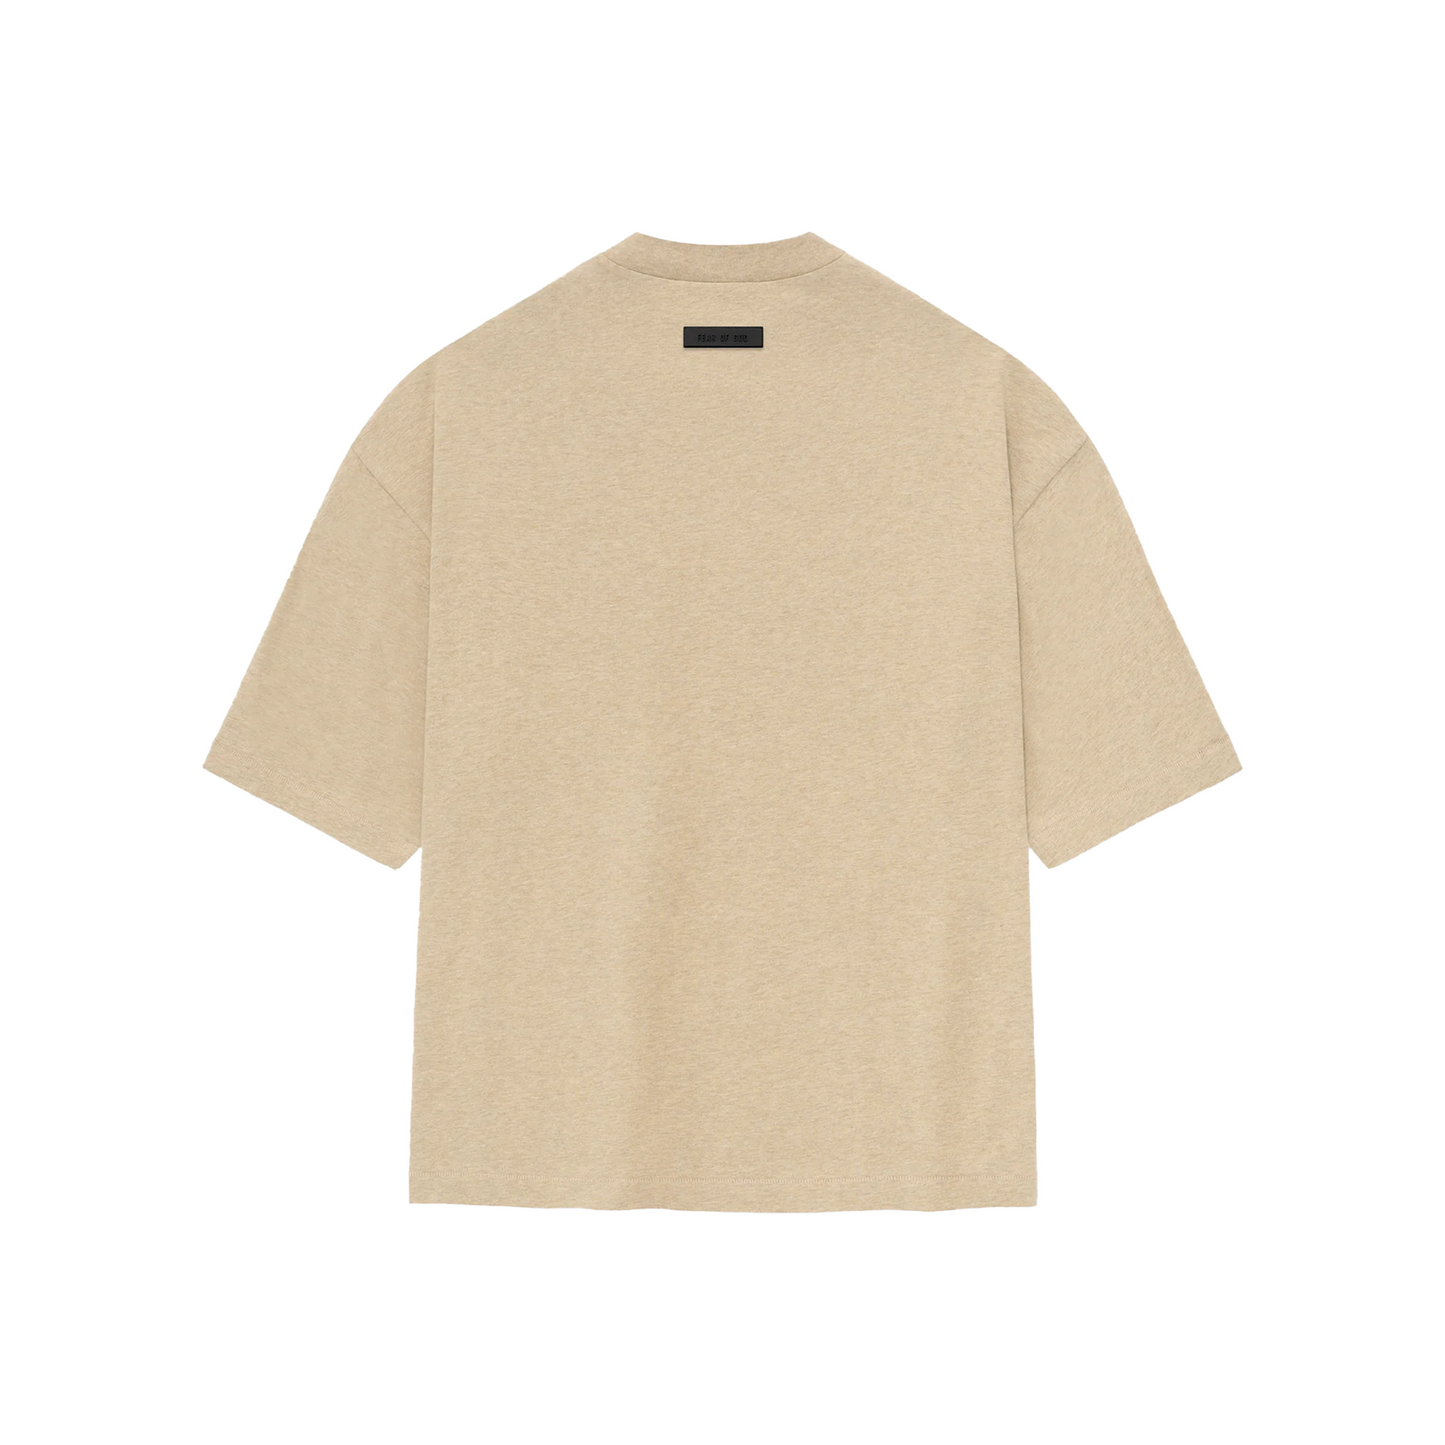 Fear of God Essentials Tee Core Gold Heather